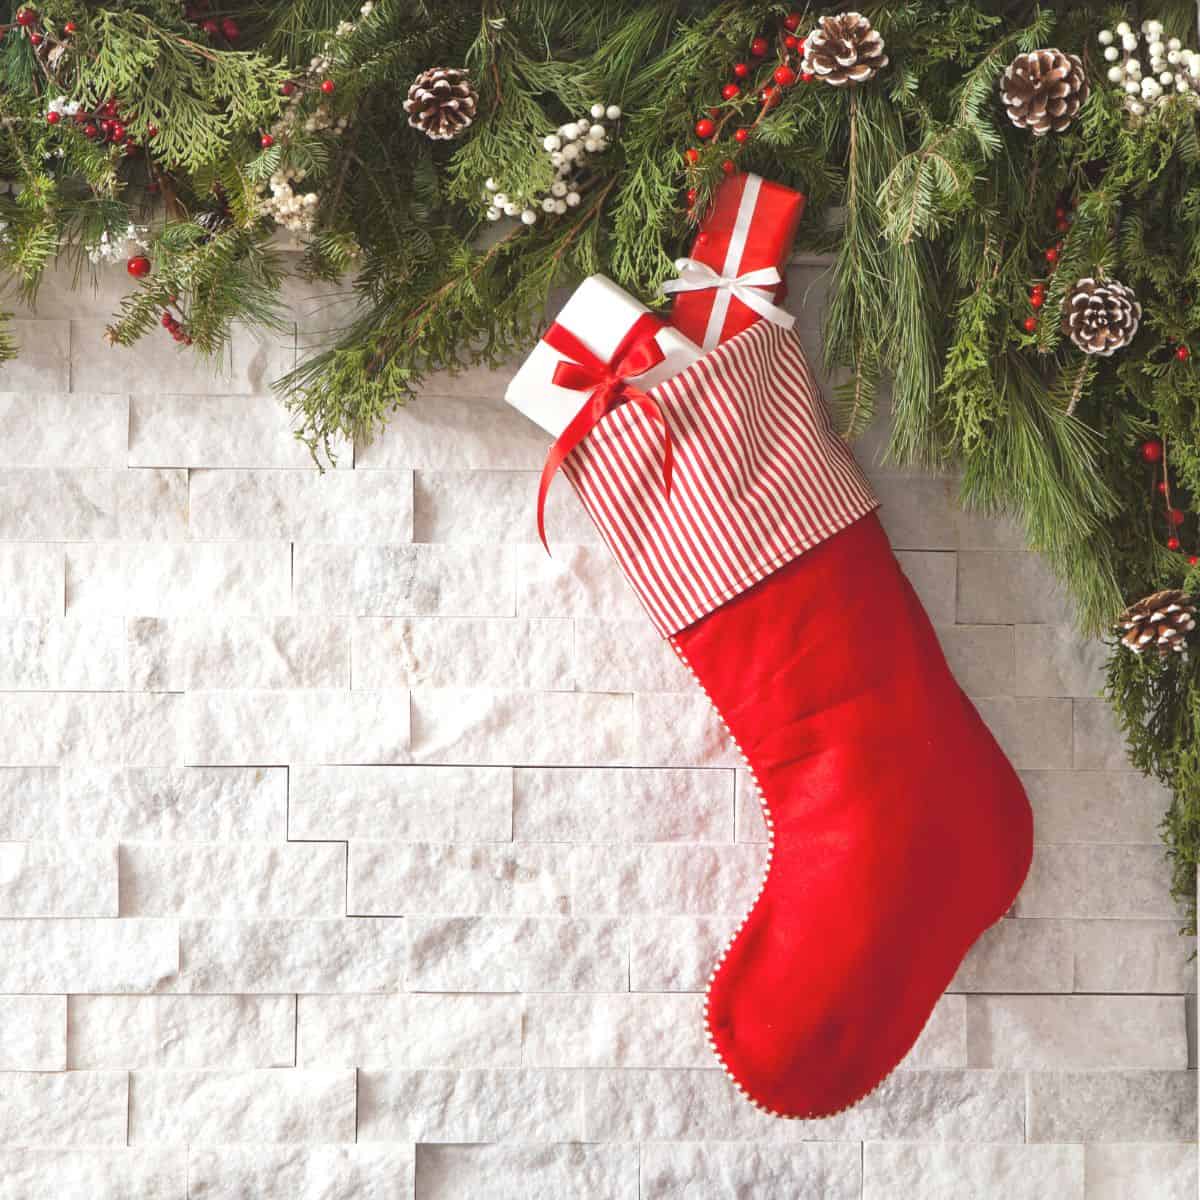 A beautiful red and white Christmas stocking hanging in front of a white brick fireplace. Green garland is strung above it with small bunches of red berries in the garland. Red and white Christmas packages peaking out of the top of the stocking.